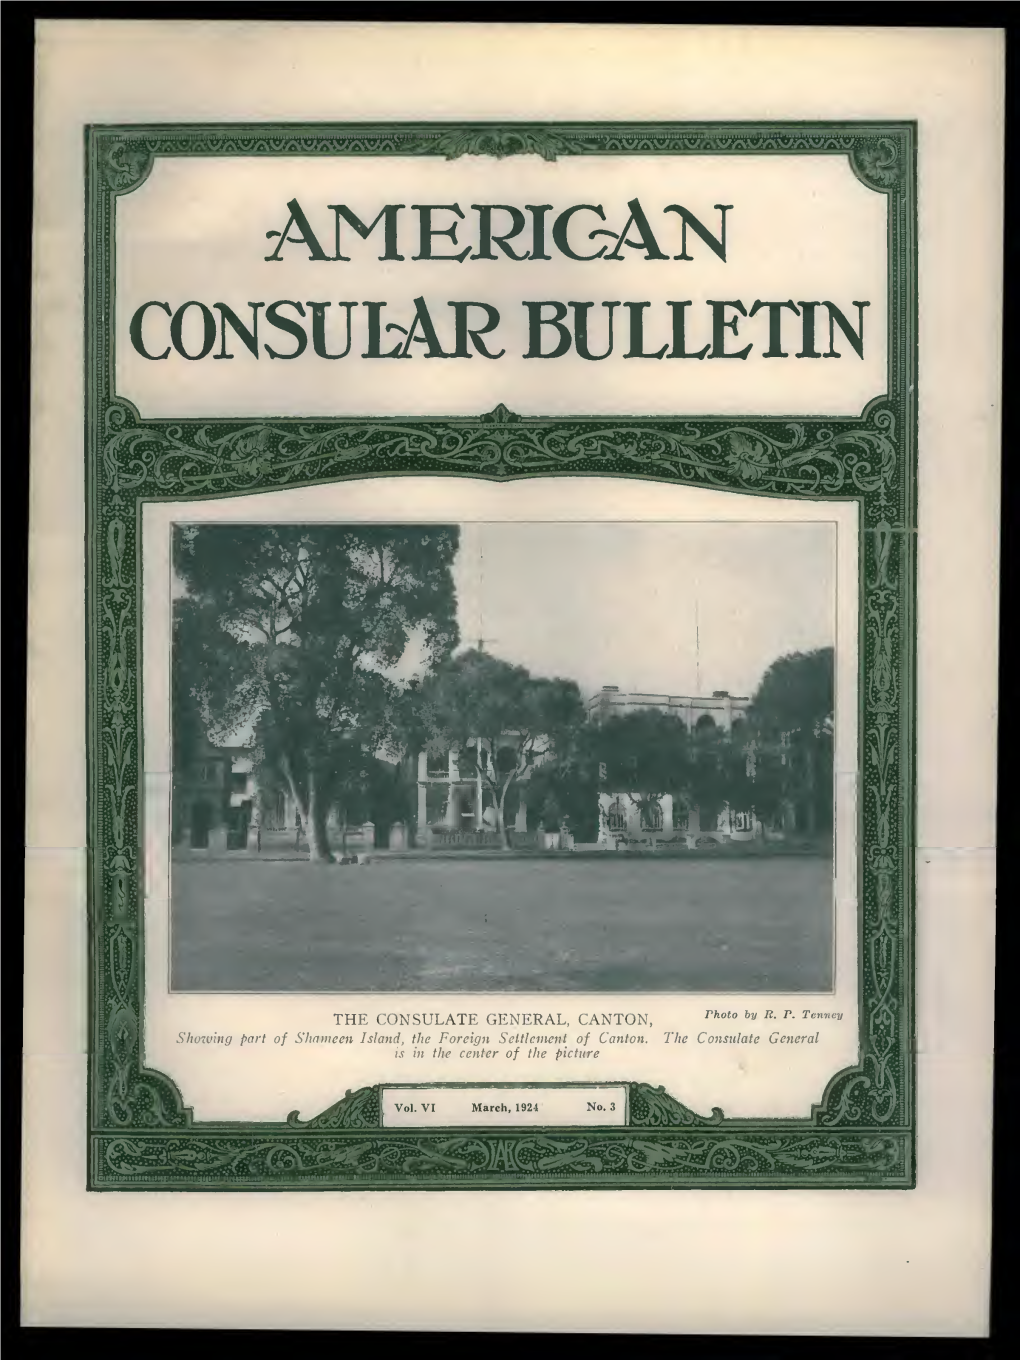 The Foreign Service Journal, March 1924 (American Consular Bulletin)